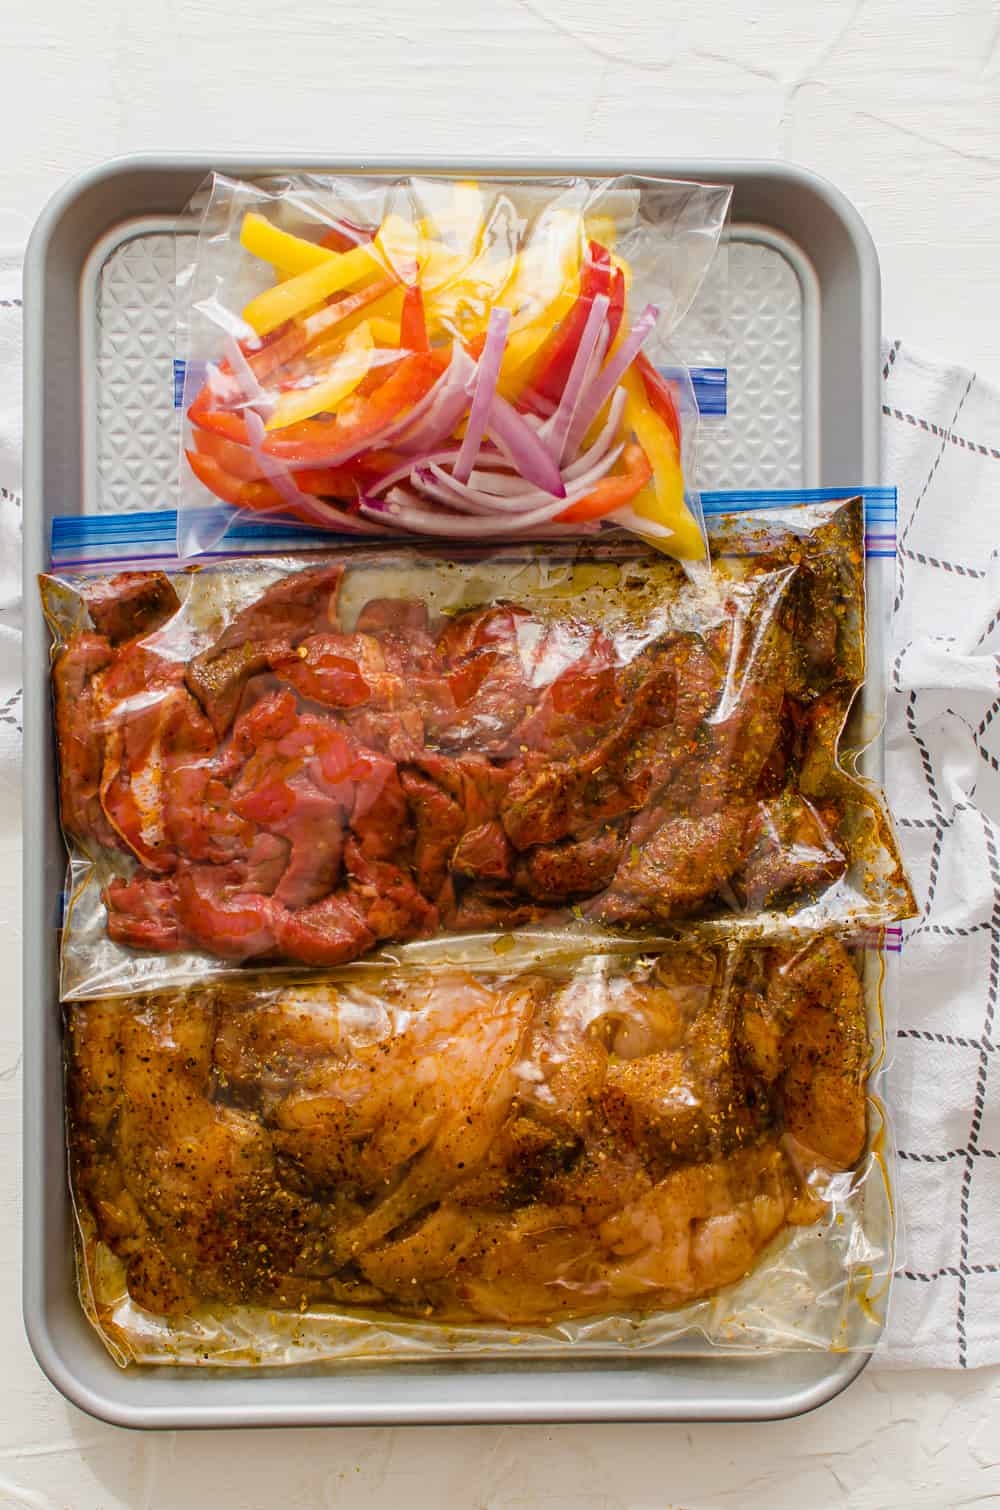 freezer meal kit of chicken, steak, and peppers and onions for fajitas